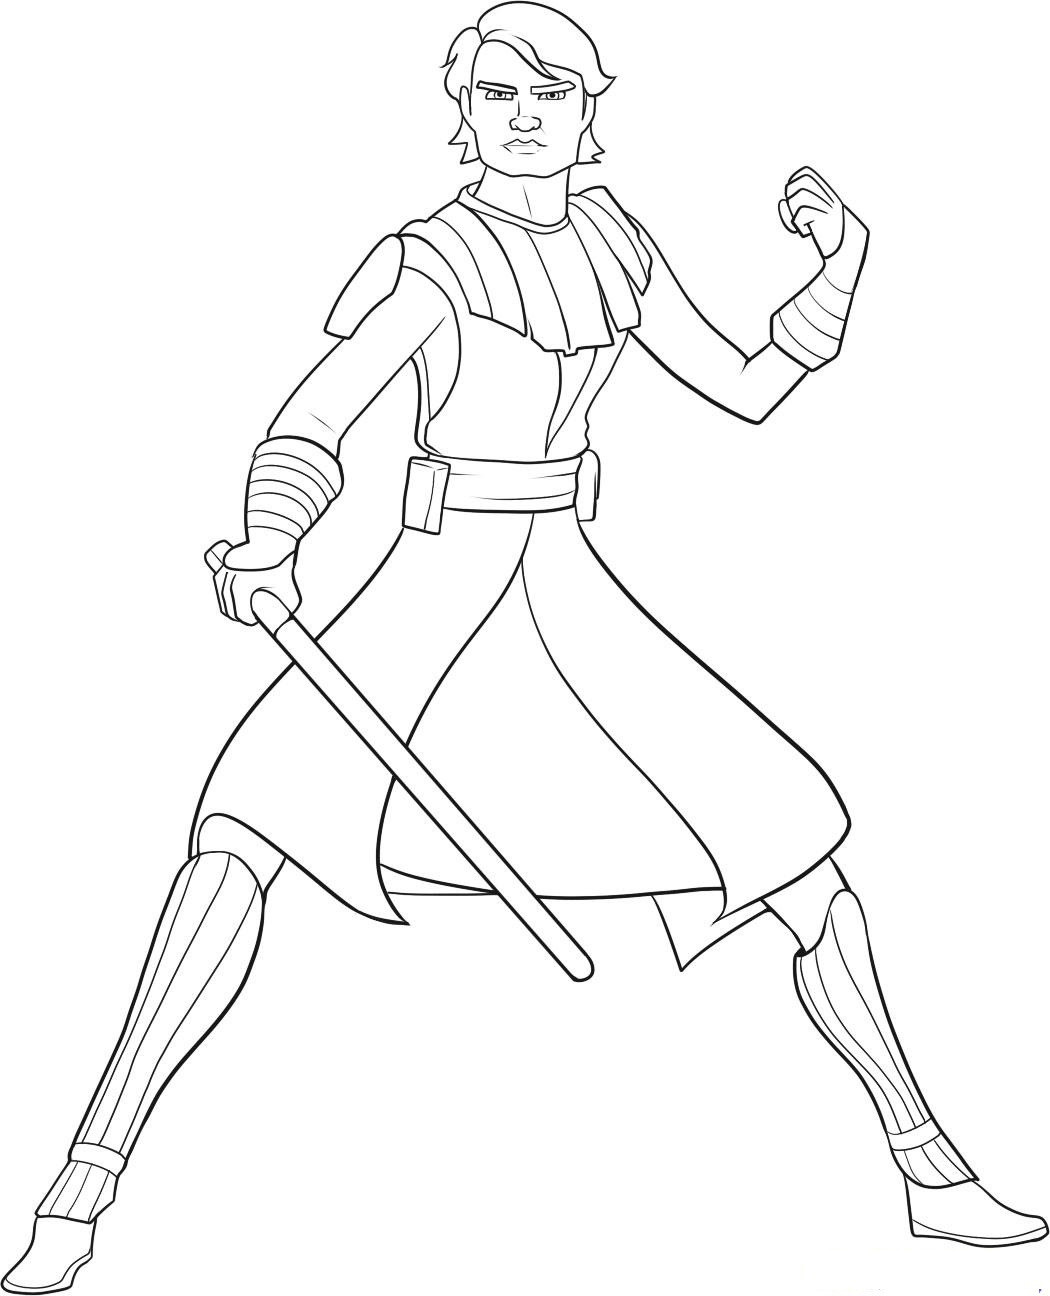 Star Wars Coloring Pages For Kids
 star wars darth vader yoda coloring pages for kids storm